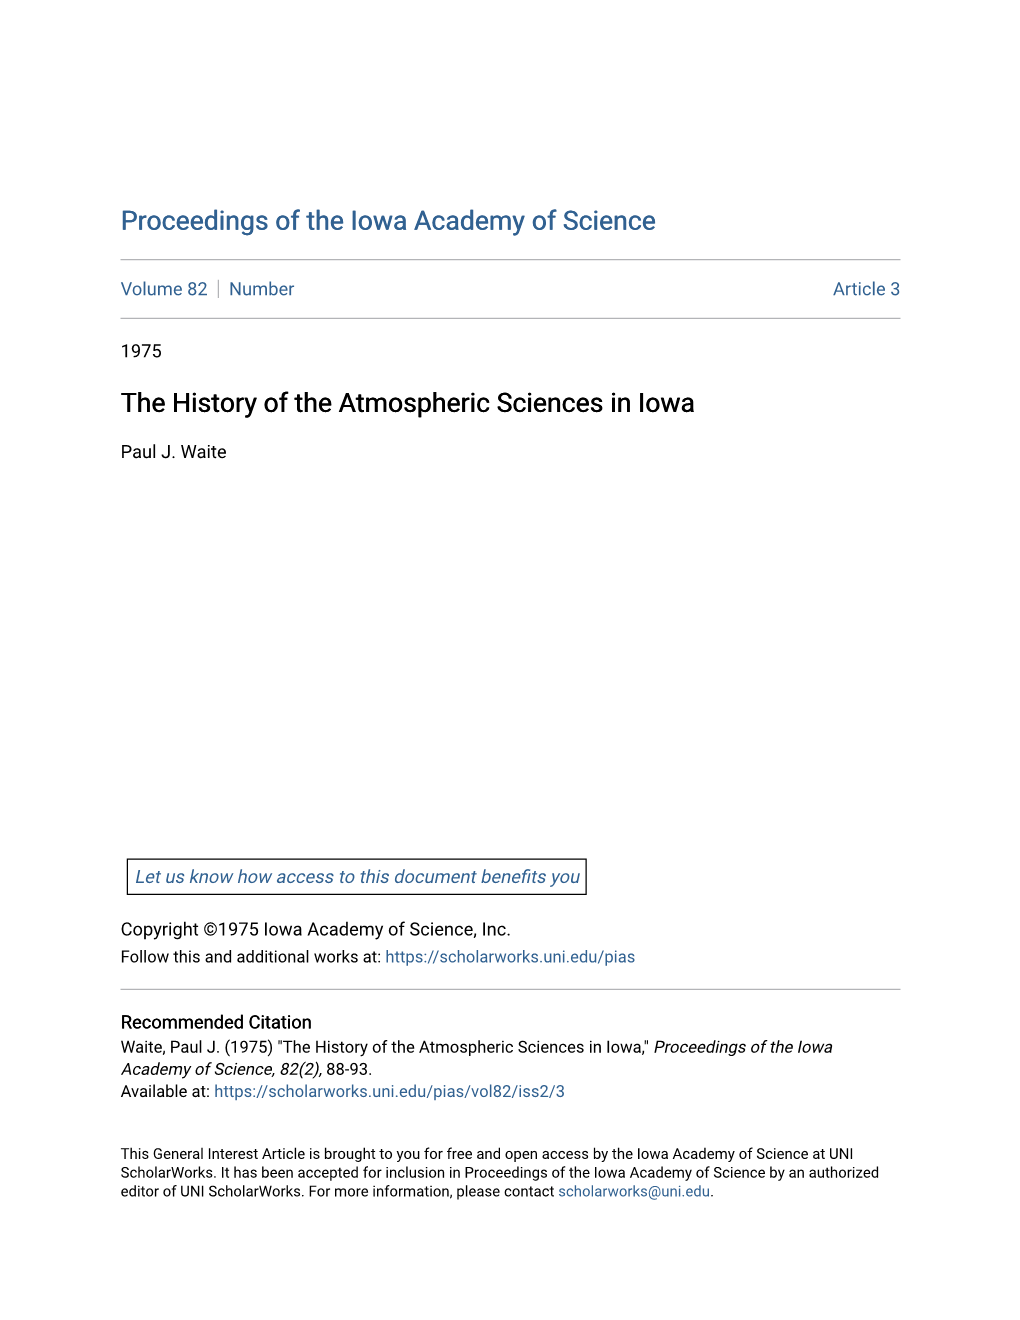 The History of the Atmospheric Sciences in Iowa